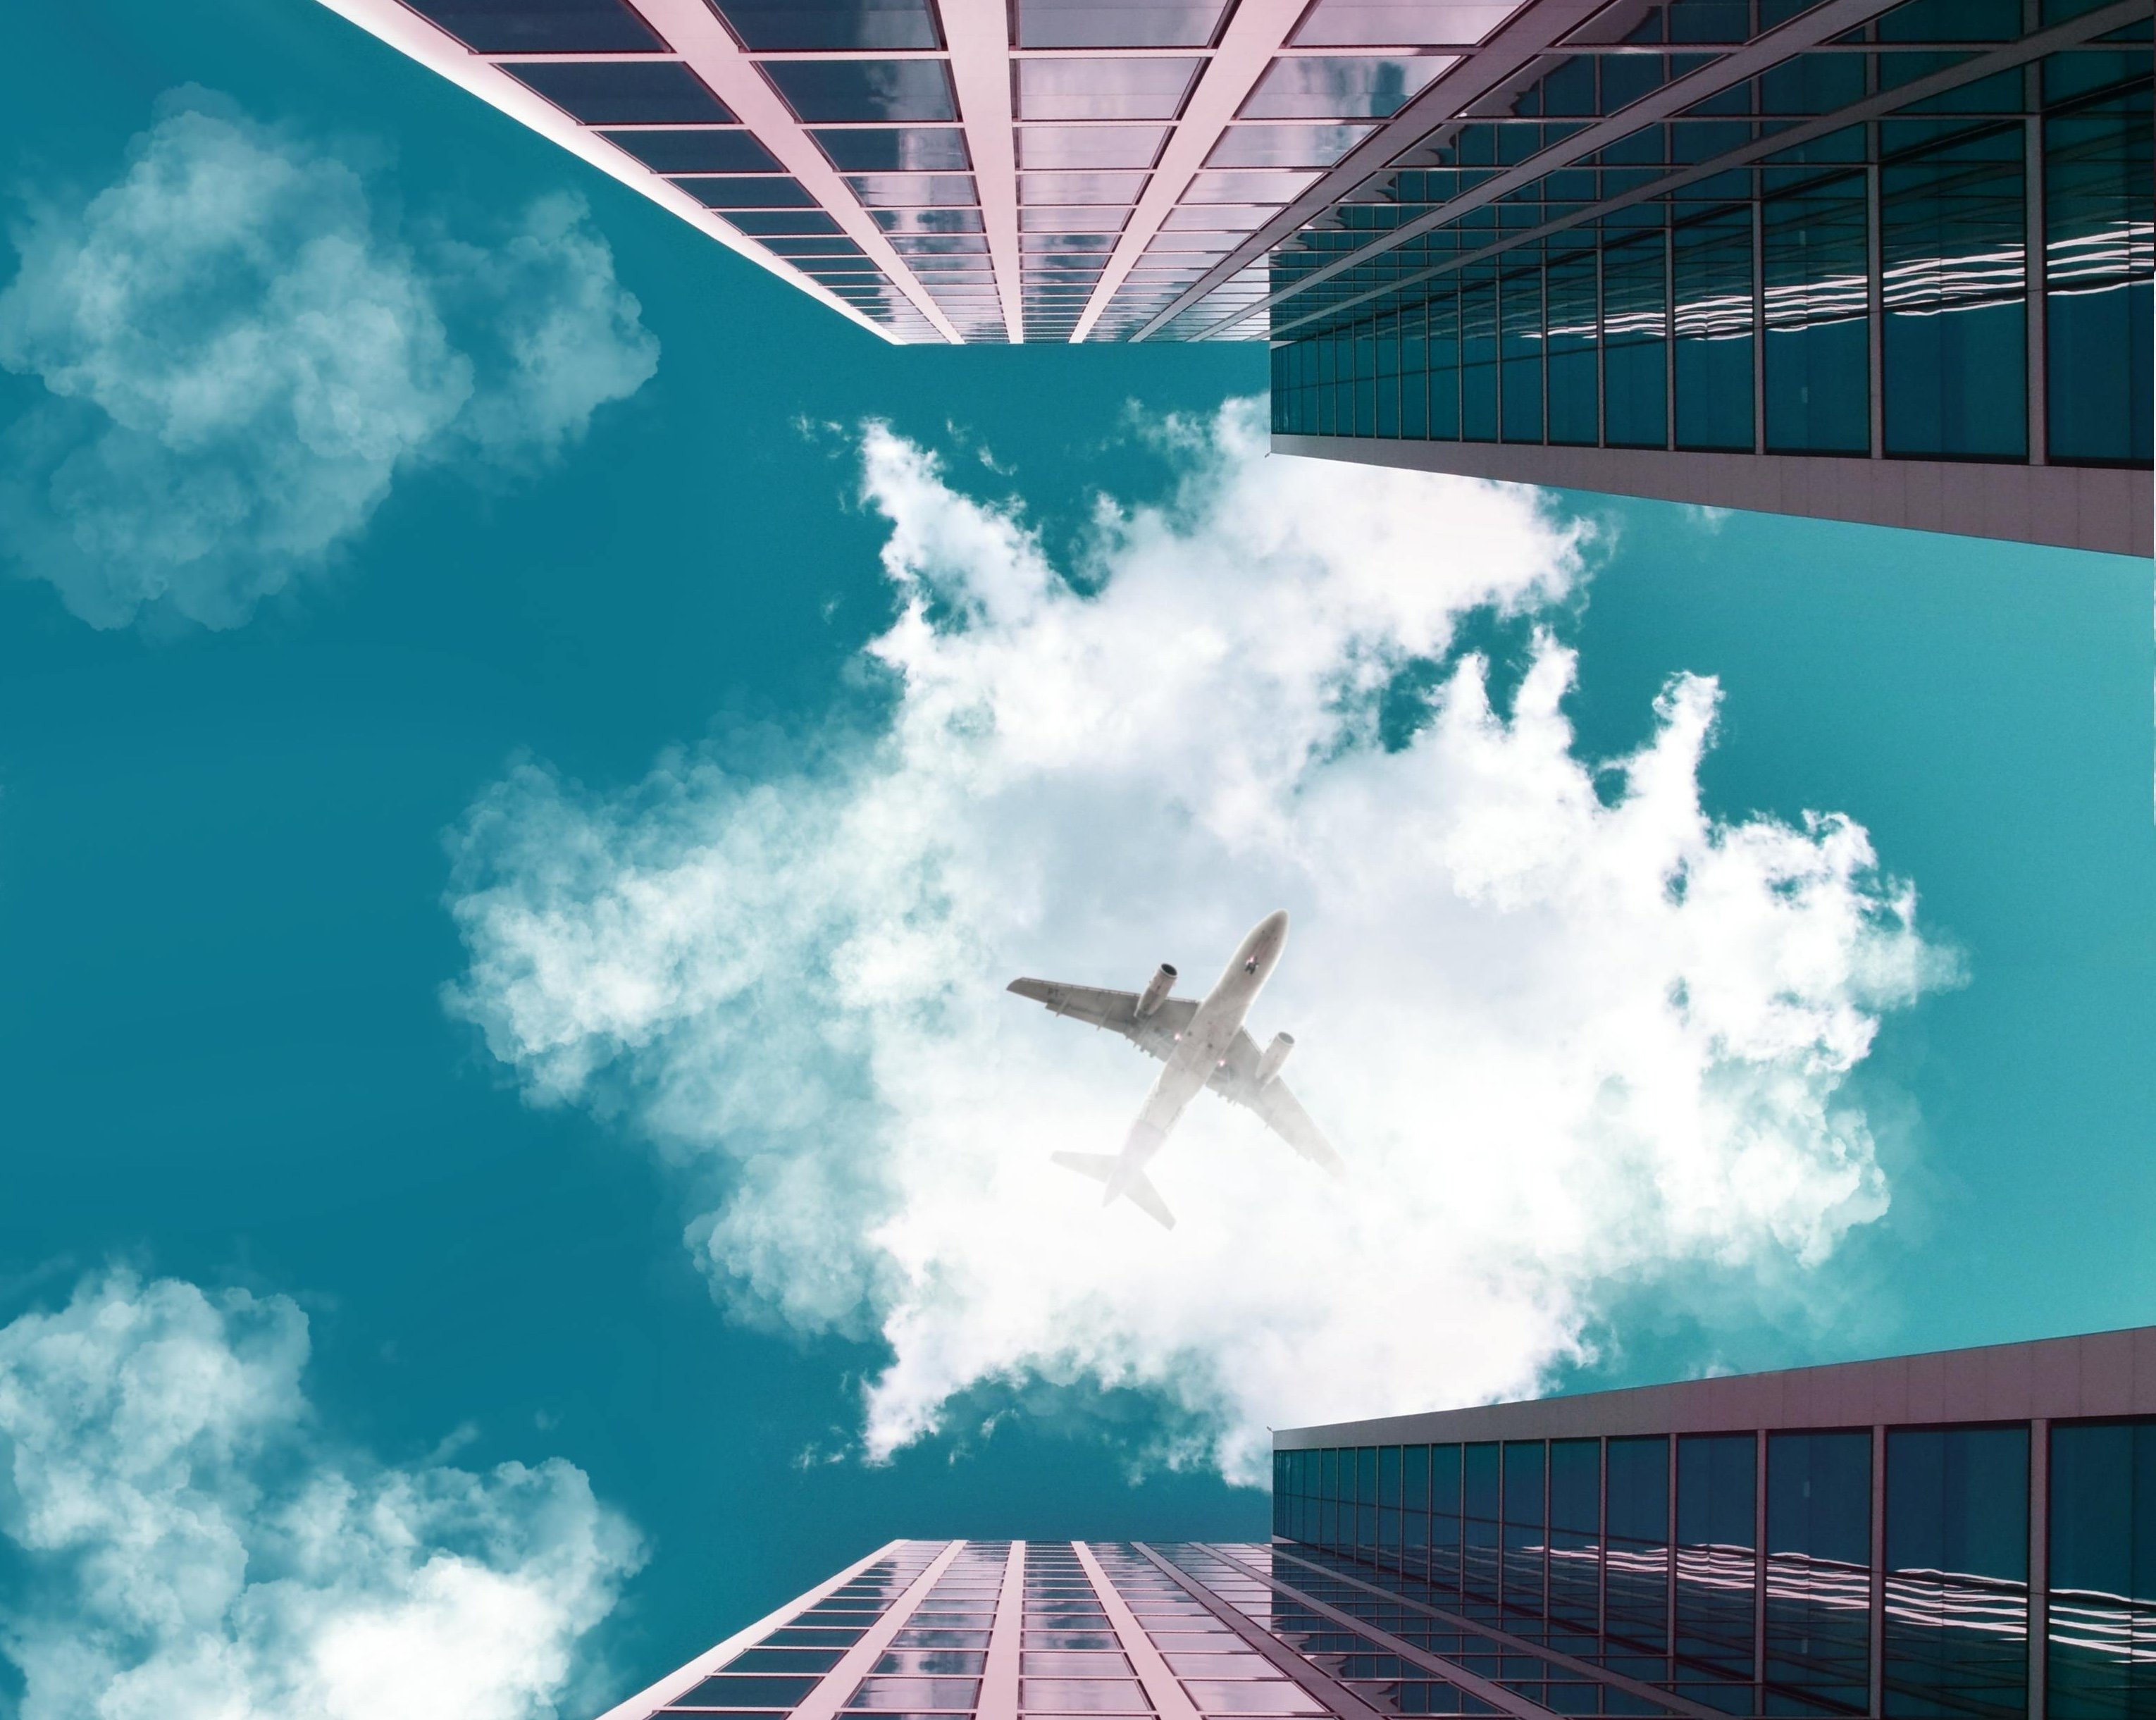 Looking up from between two skyscrapers at a passing airplane against a backdrop of blue sky and fluffy clouds.